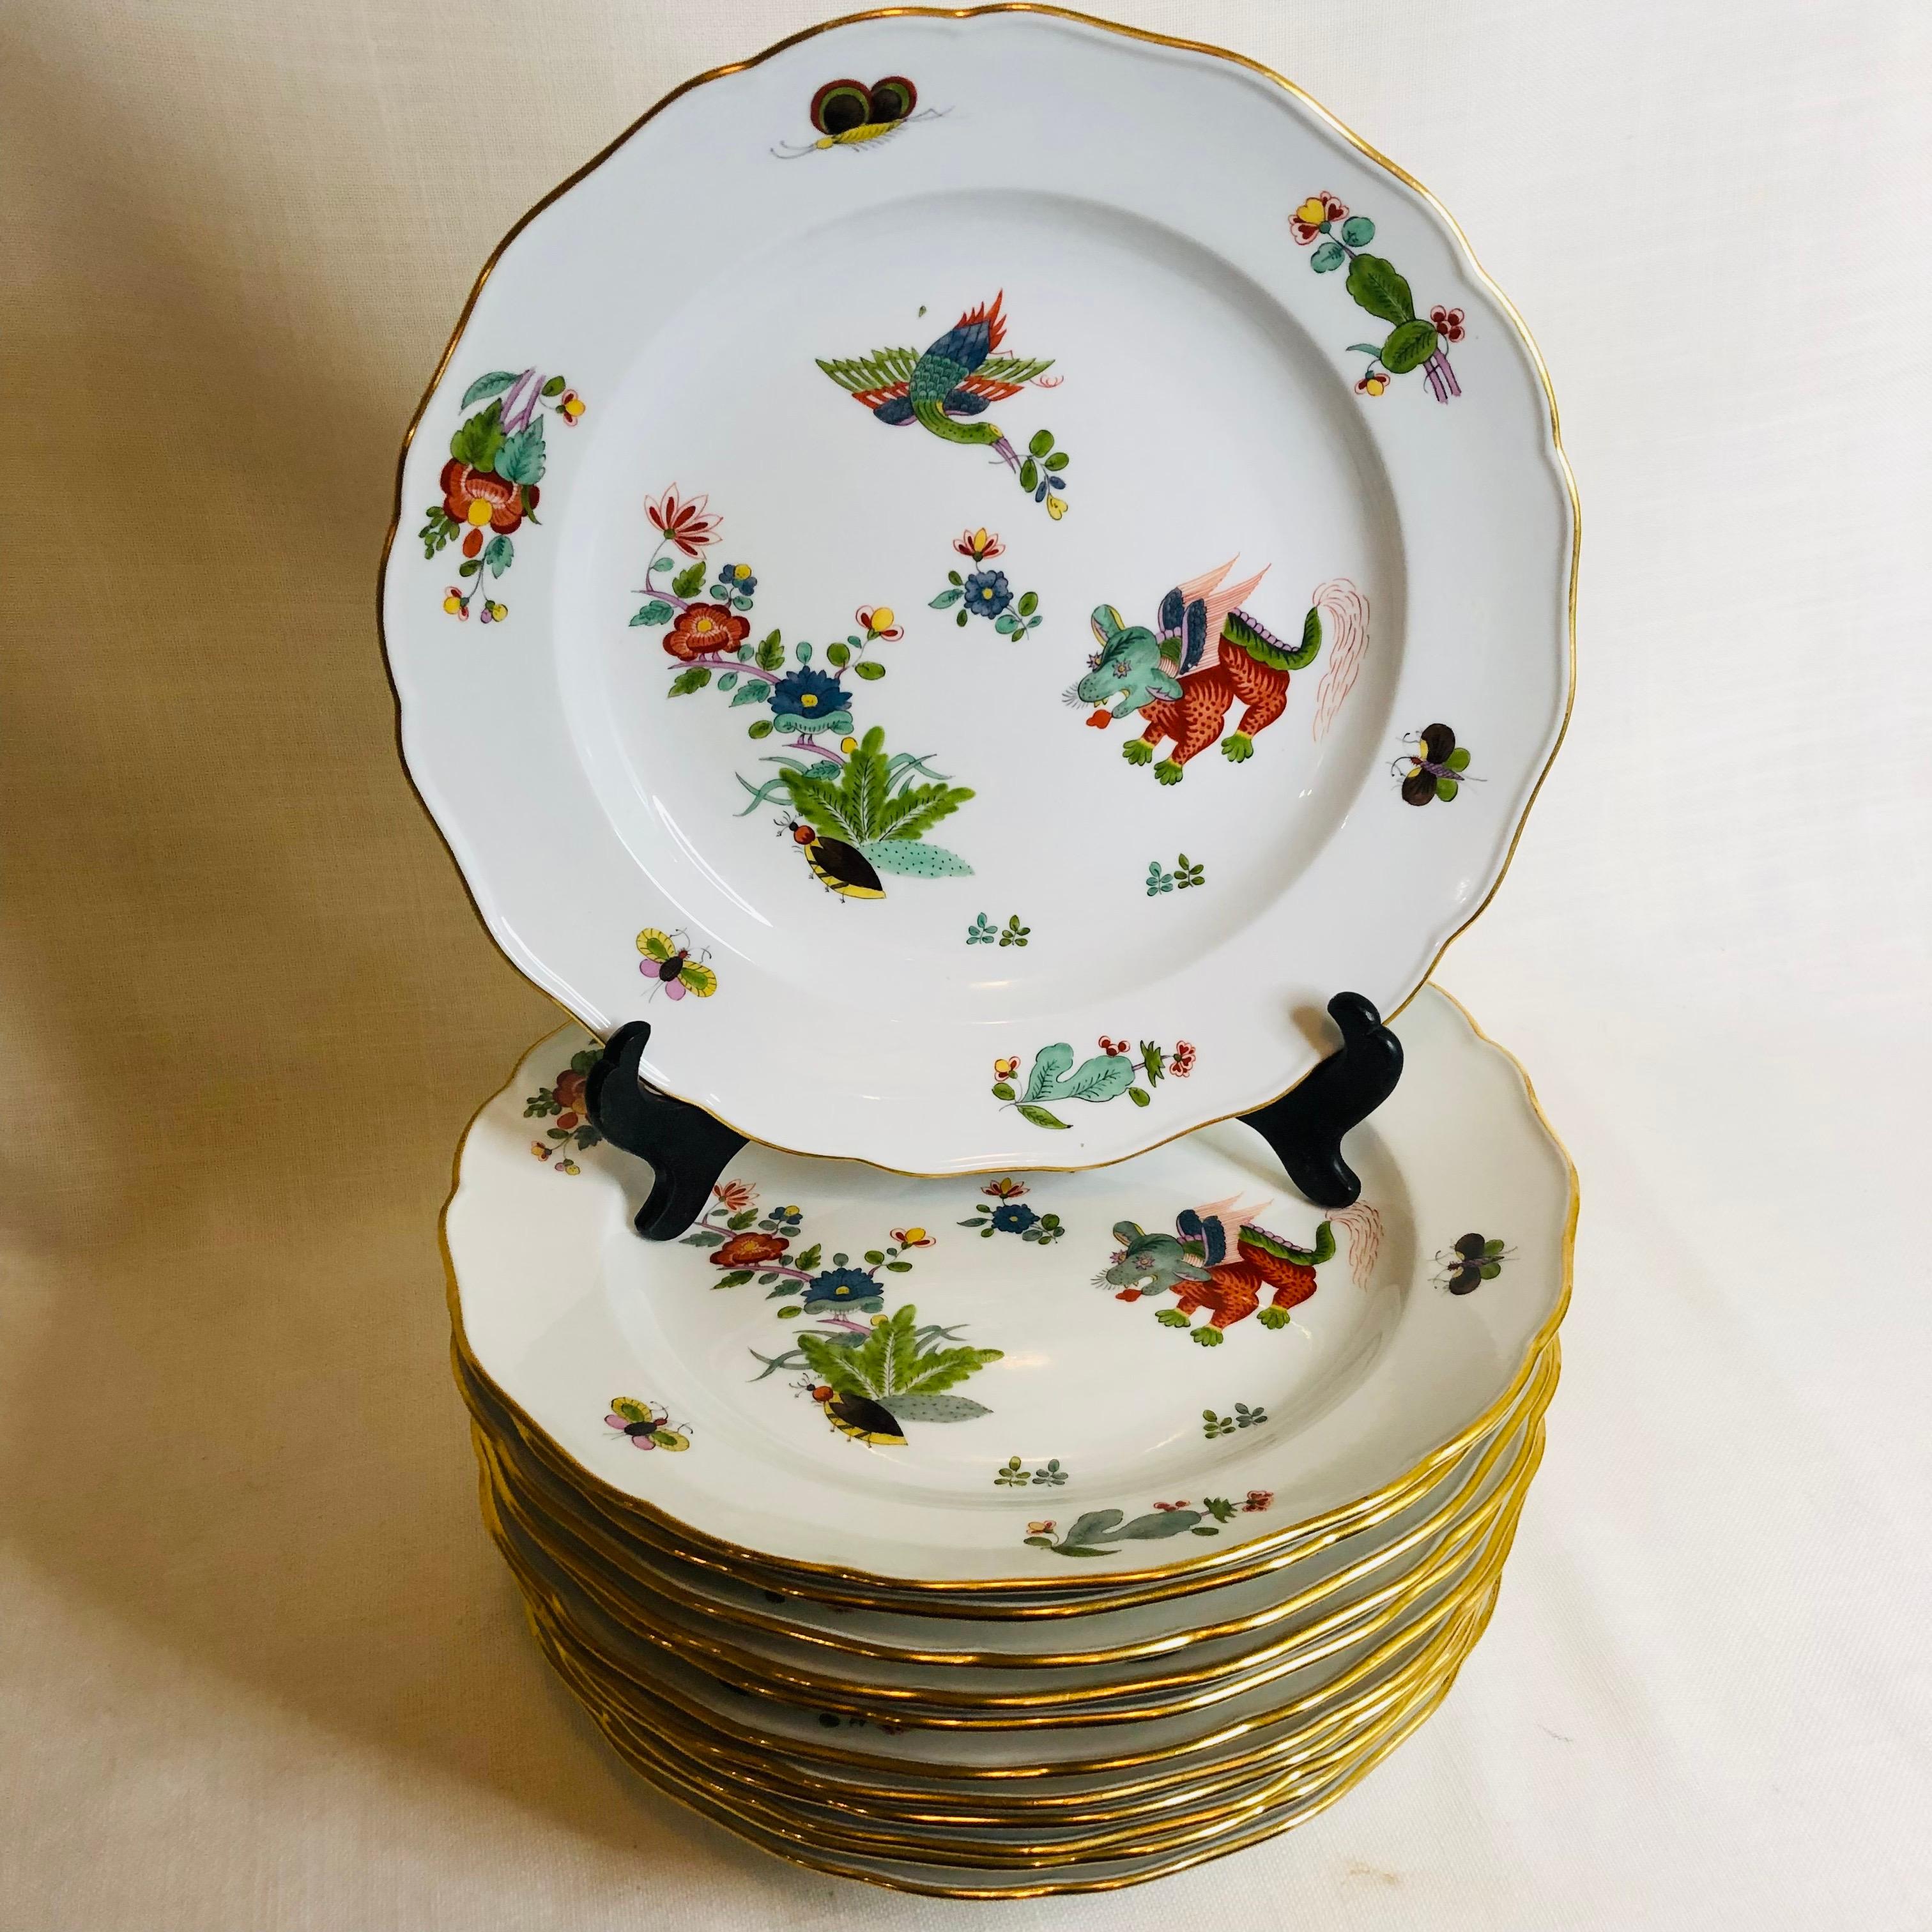 I want to offer you this rare set of twelve Meissen dinner plates. In thirty years of specializing in Meissen porcelain, I have only seen this pattern once before in a covered condiment. I was amazed to find this beautiful set of twelve Meissen